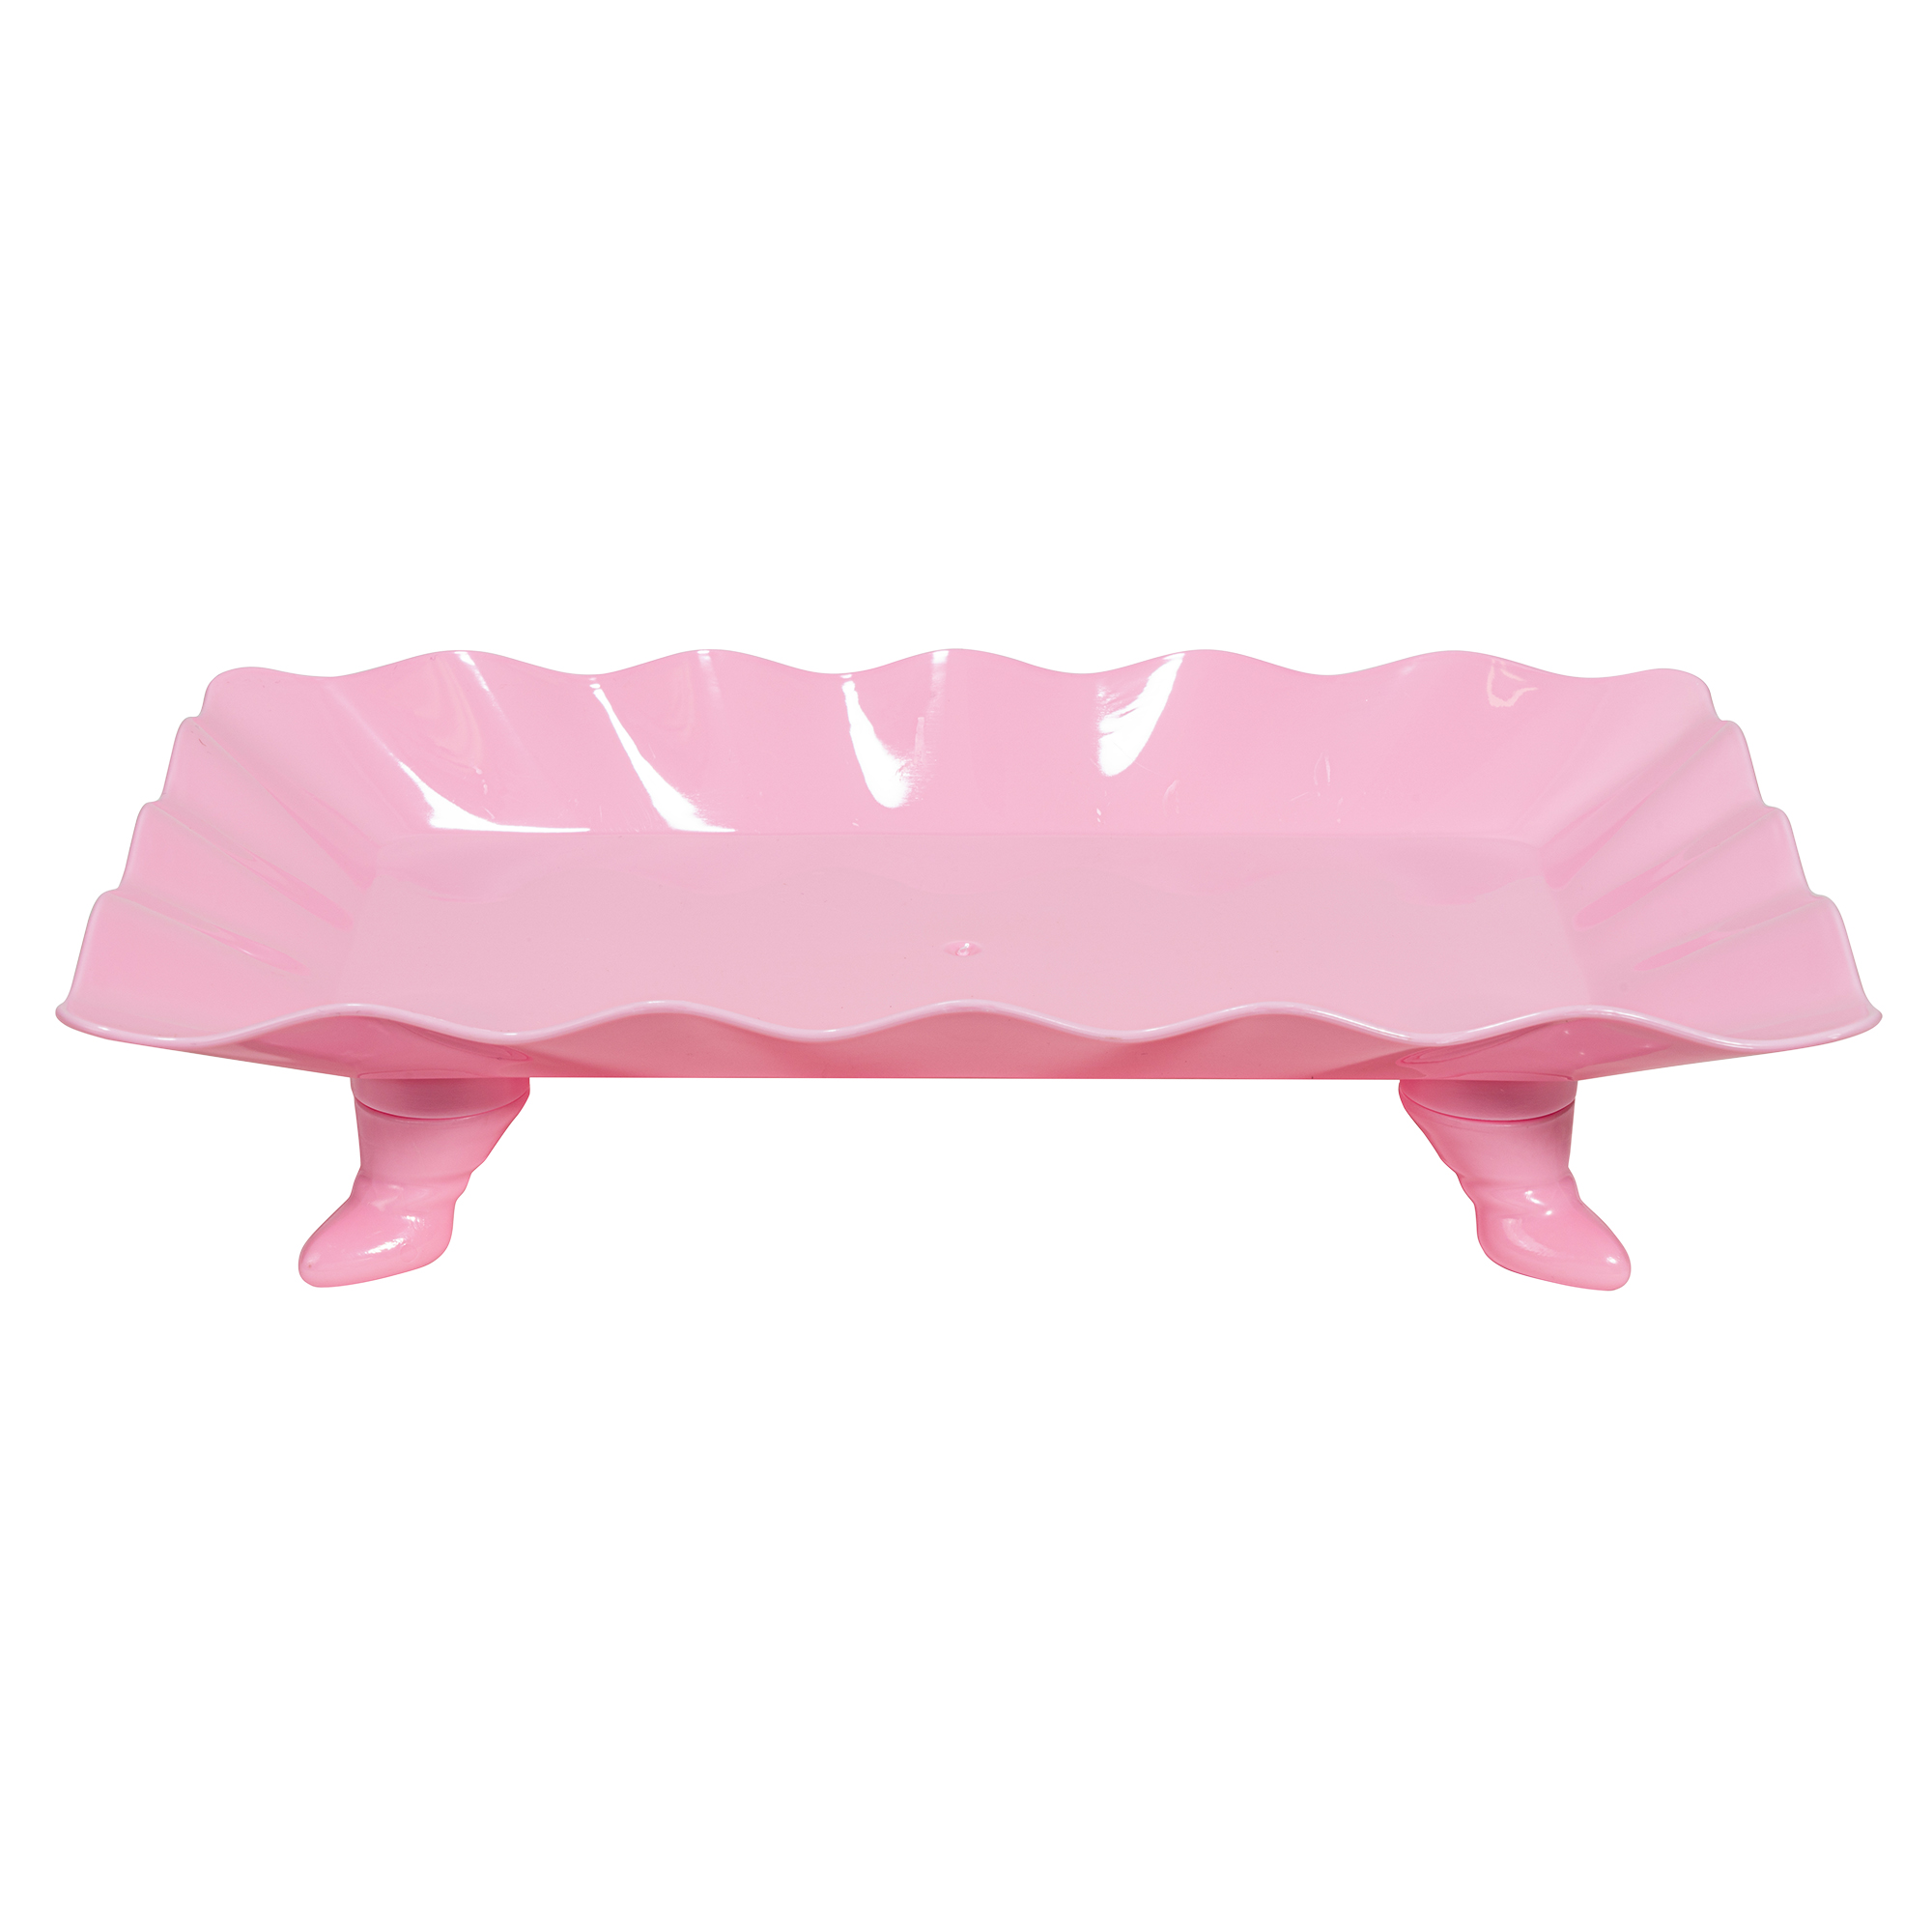 Plastic Scalloped Treat Stand - Pink